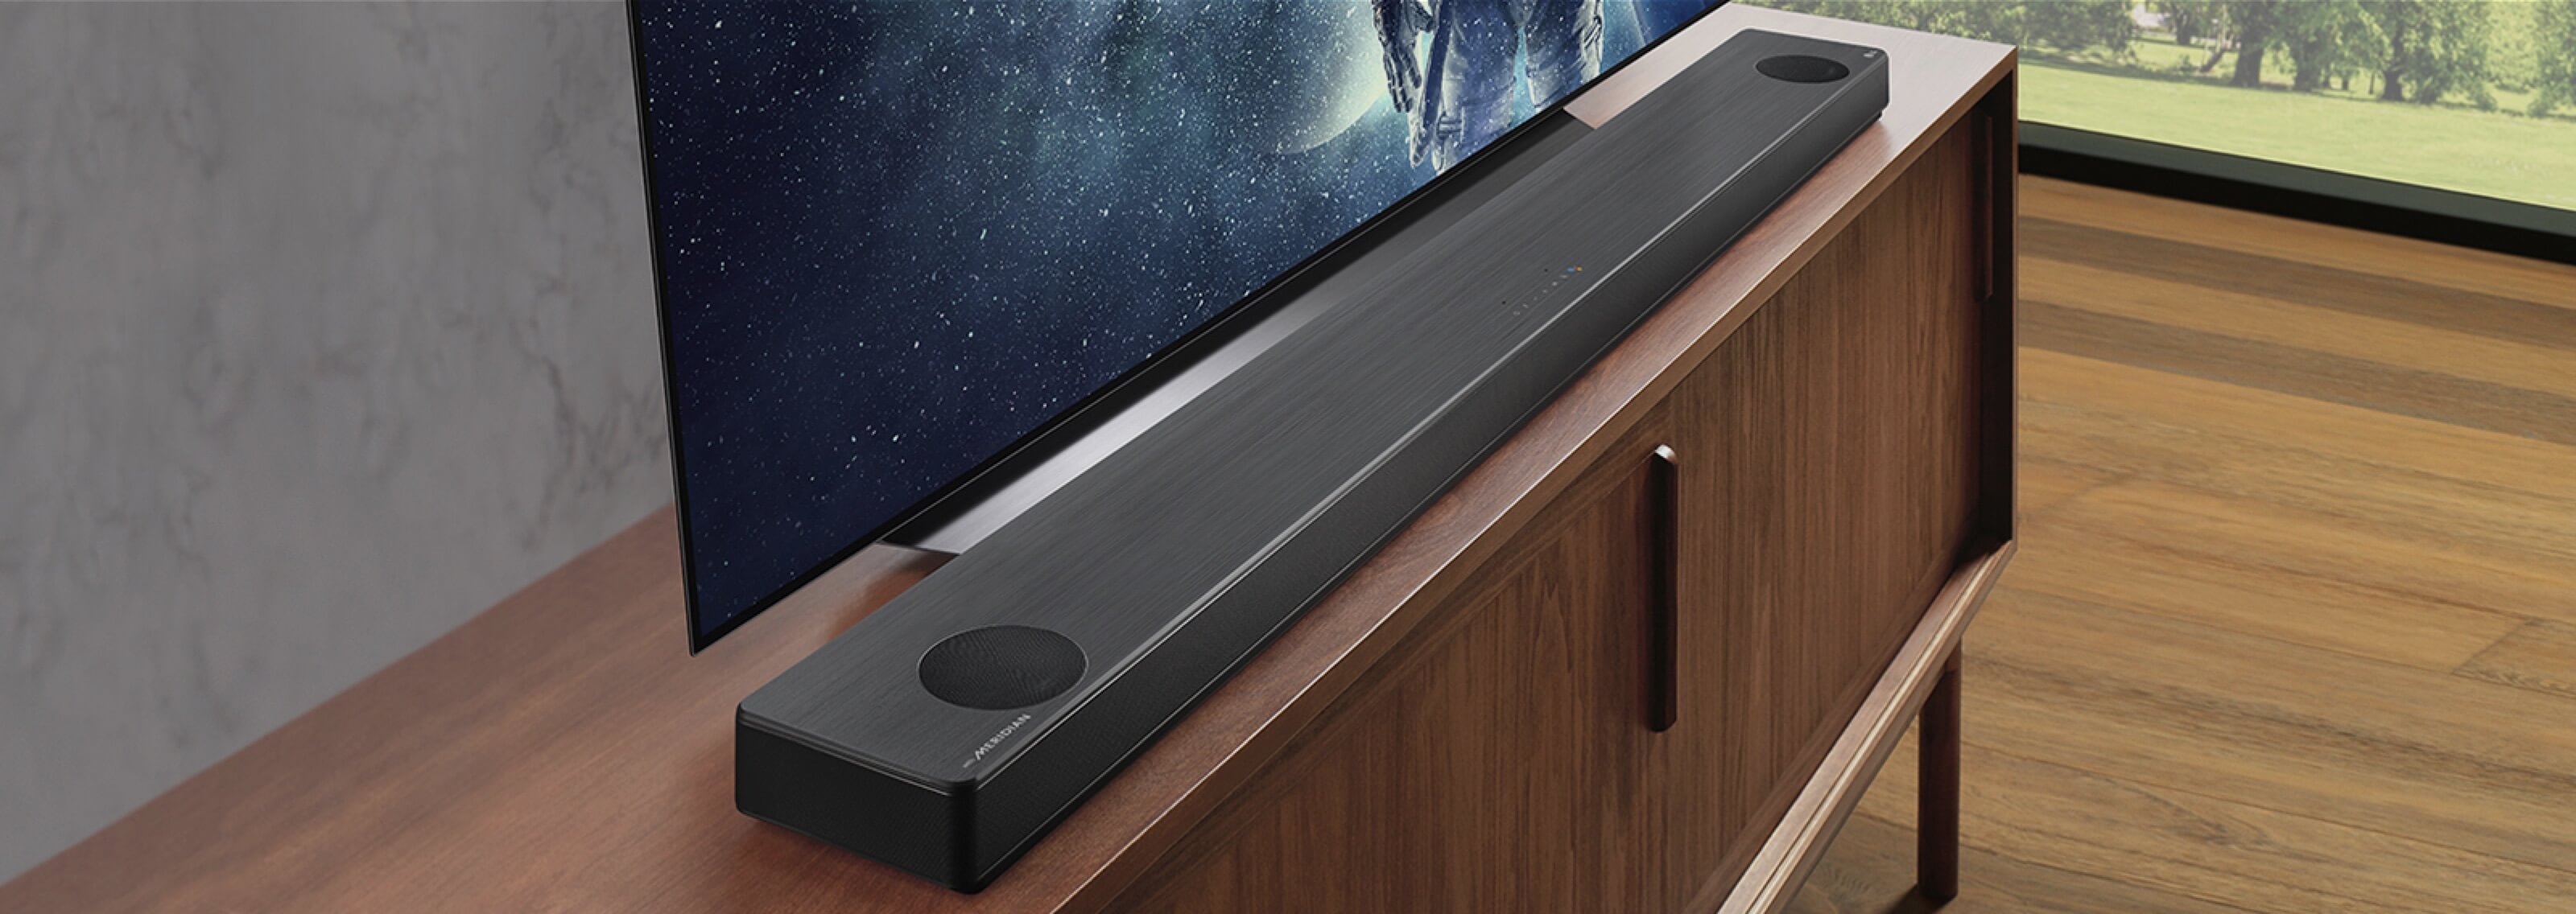 LG's new sound bar range for 2019 includes Dolby Atmos and Google Assistant  - CNET